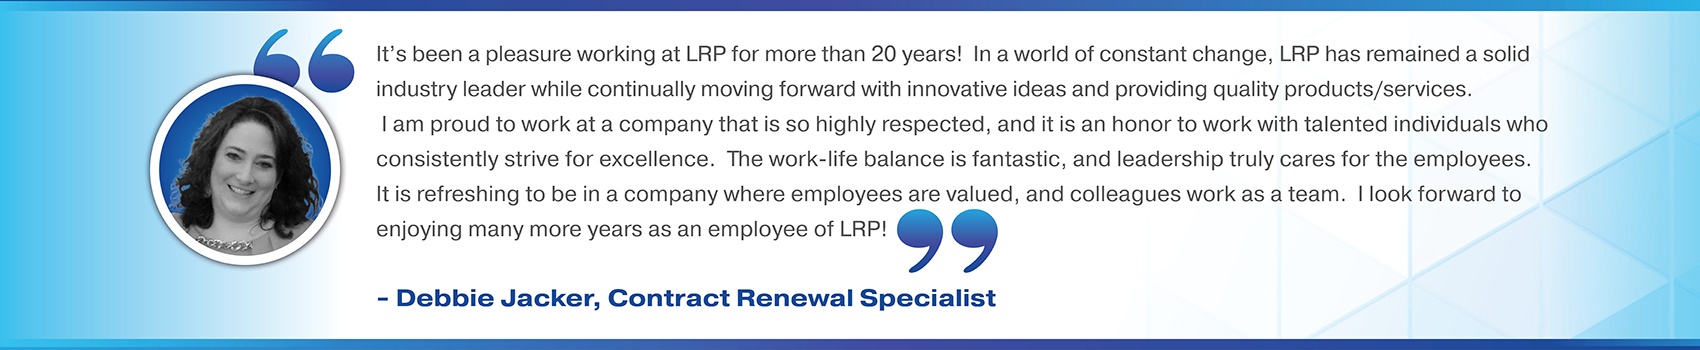 It’s been a pleasure working at LRP for more than 20 years!  In a world of constant change, LRP has remained a solid industry leader while continually moving forward with innovative ideas and providing quality products/services.  I am proud to work at a company that is so highly respected, and it is an honor to work with talented individuals who consistently strive for excellence.  The work-life balance is fantastic, and leadership truly cares for the employees.  It is refreshing to be in a company where employees are valued, and colleagues work as a team.  I look forward to enjoying many more years as an employee of LRP! Debbie Jacker, Contract Renewal Specialist